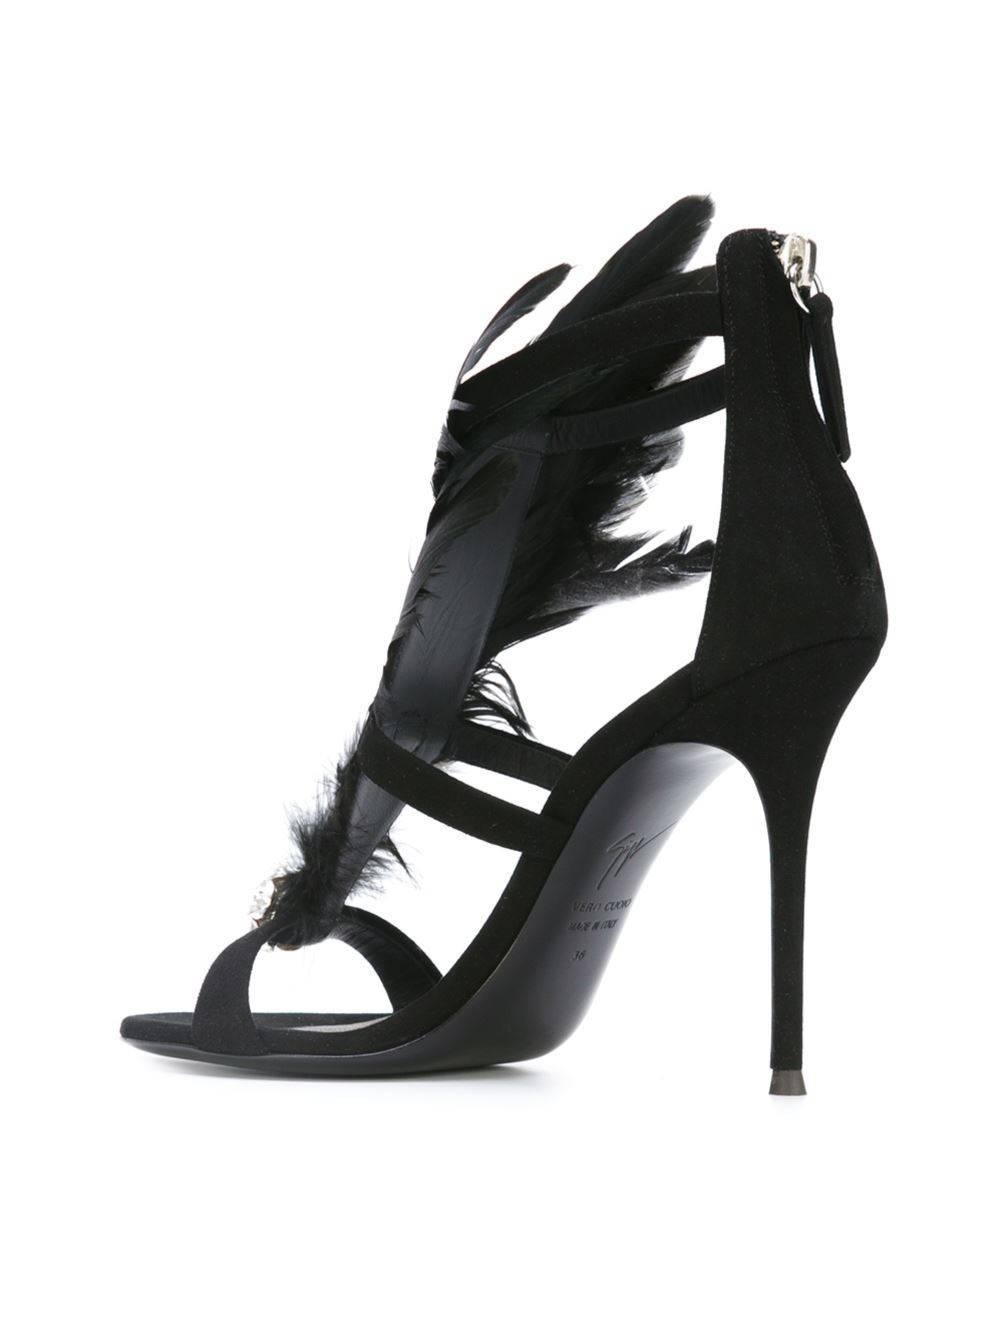 Women's Giuseppe Zanotti NEW & SOLD OUT Black Peacock Evening Sandals Heels in Box